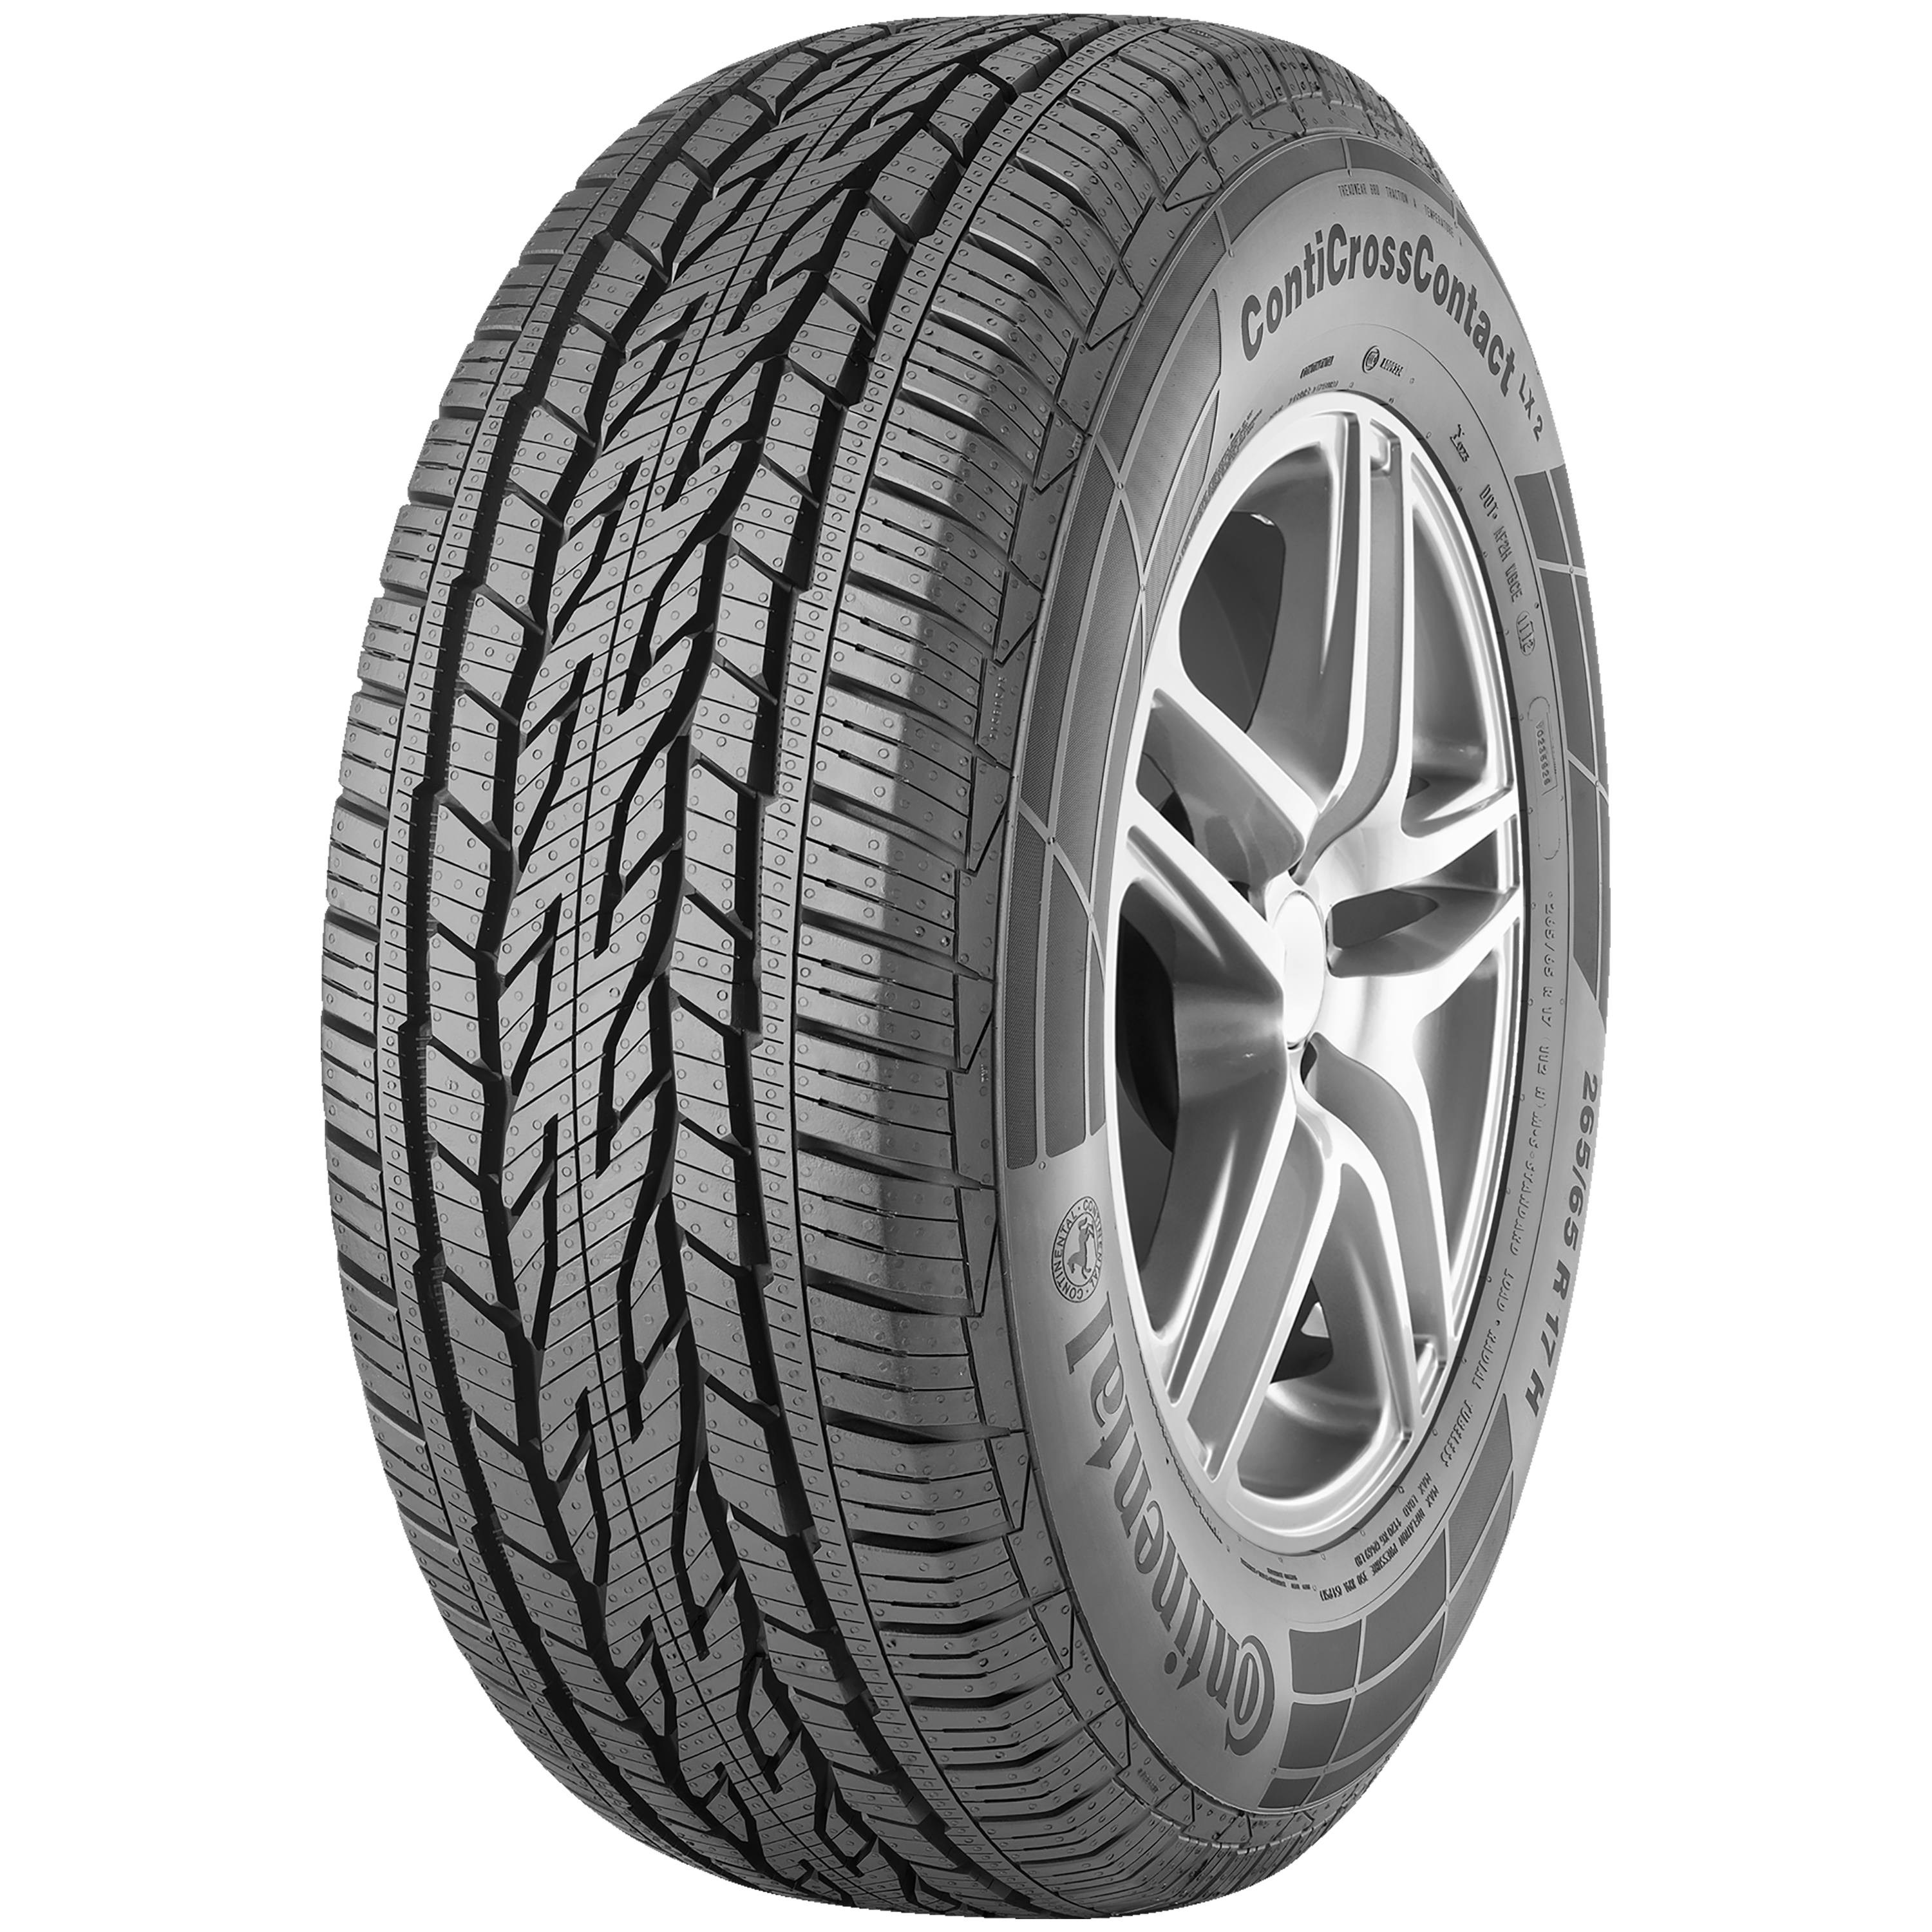 ContiCrossContact™ LX 2 | Continental tyres